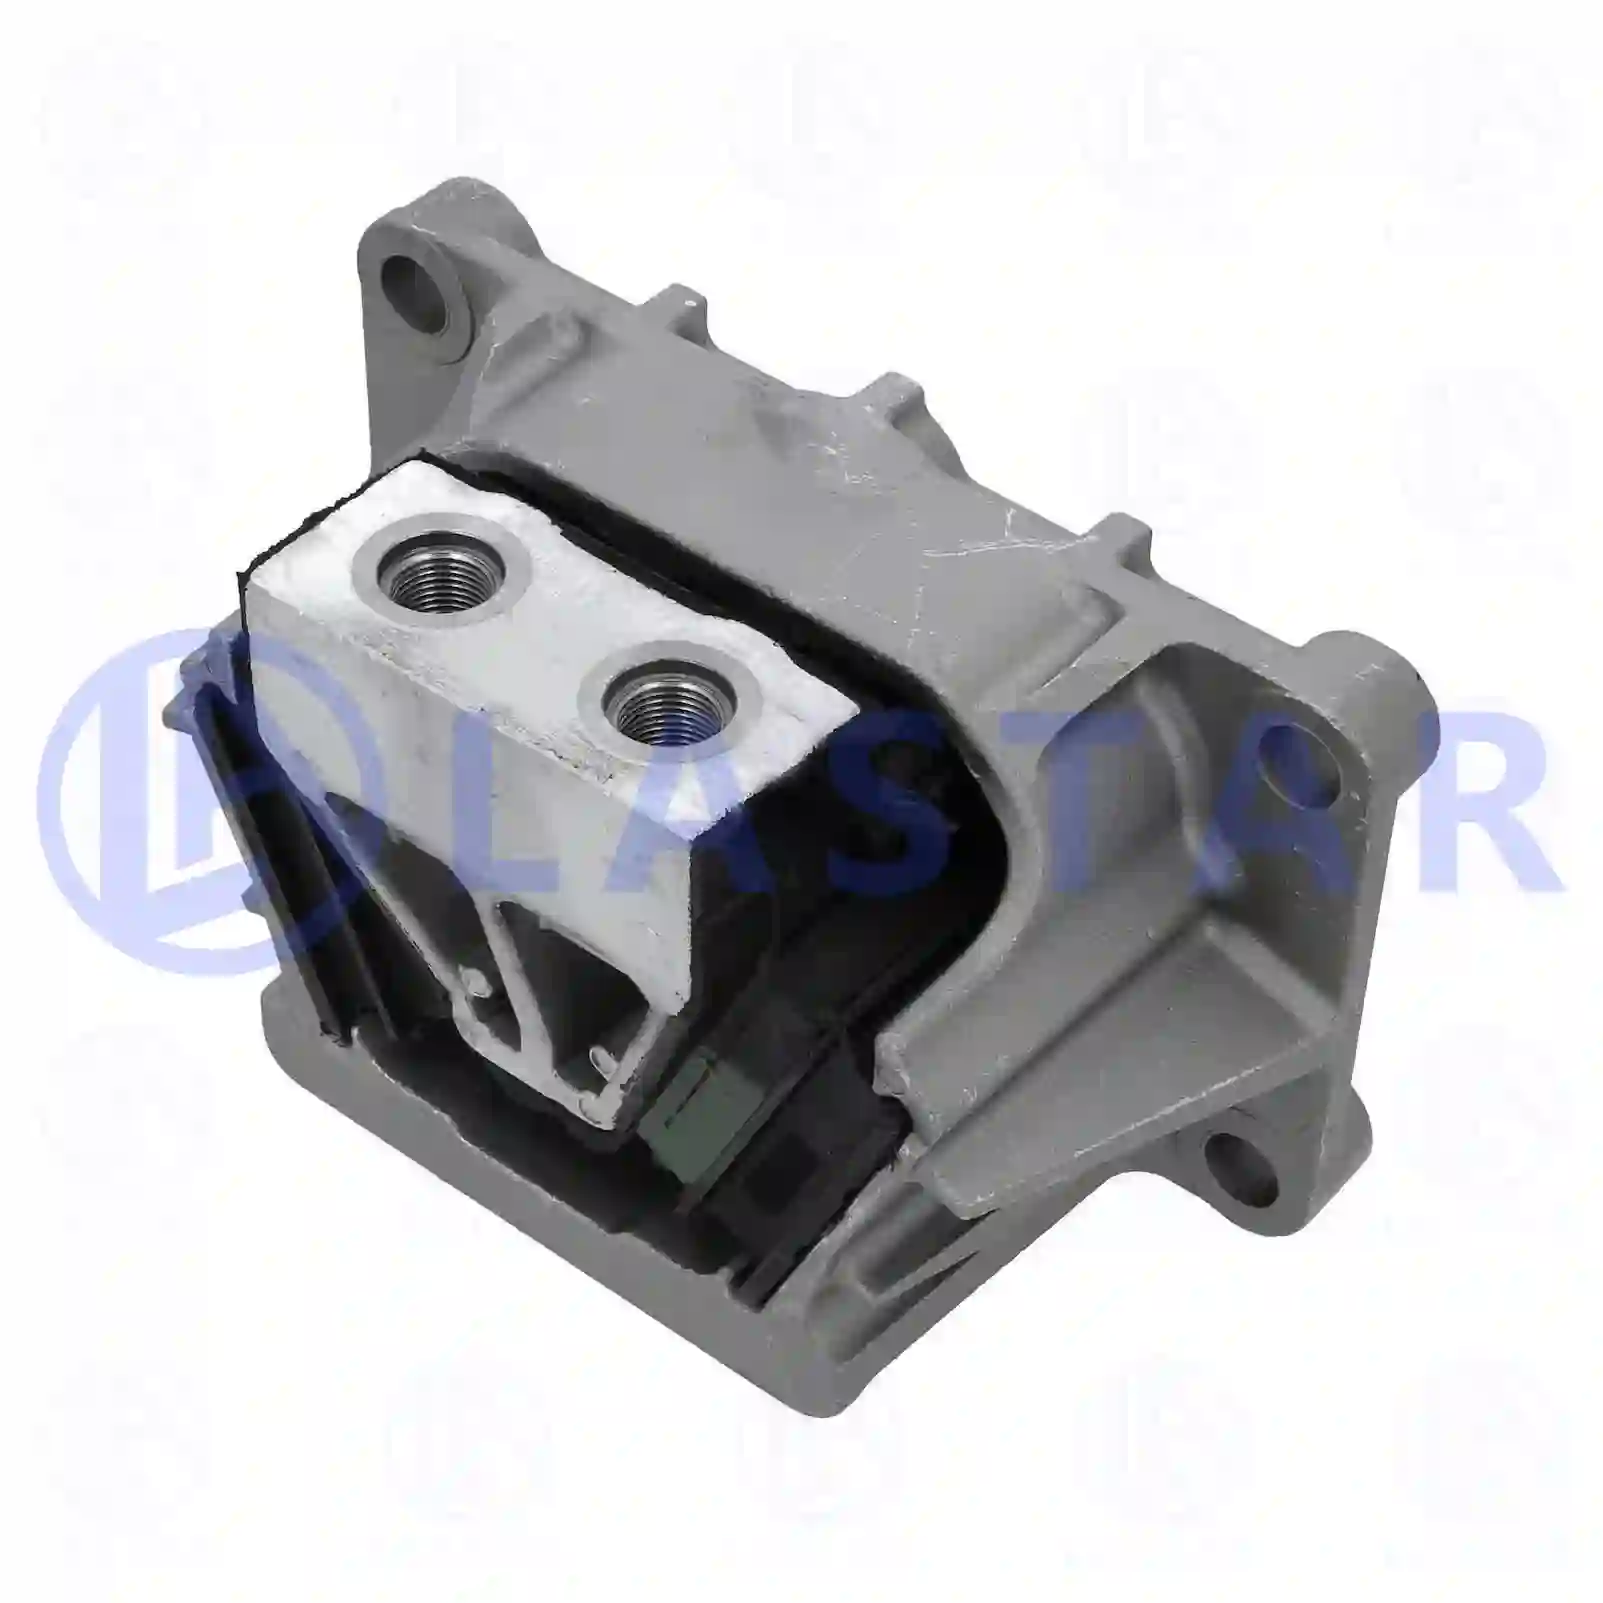 Engine mounting, 77702419, 9412416713, , , , ||  77702419 Lastar Spare Part | Truck Spare Parts, Auotomotive Spare Parts Engine mounting, 77702419, 9412416713, , , , ||  77702419 Lastar Spare Part | Truck Spare Parts, Auotomotive Spare Parts